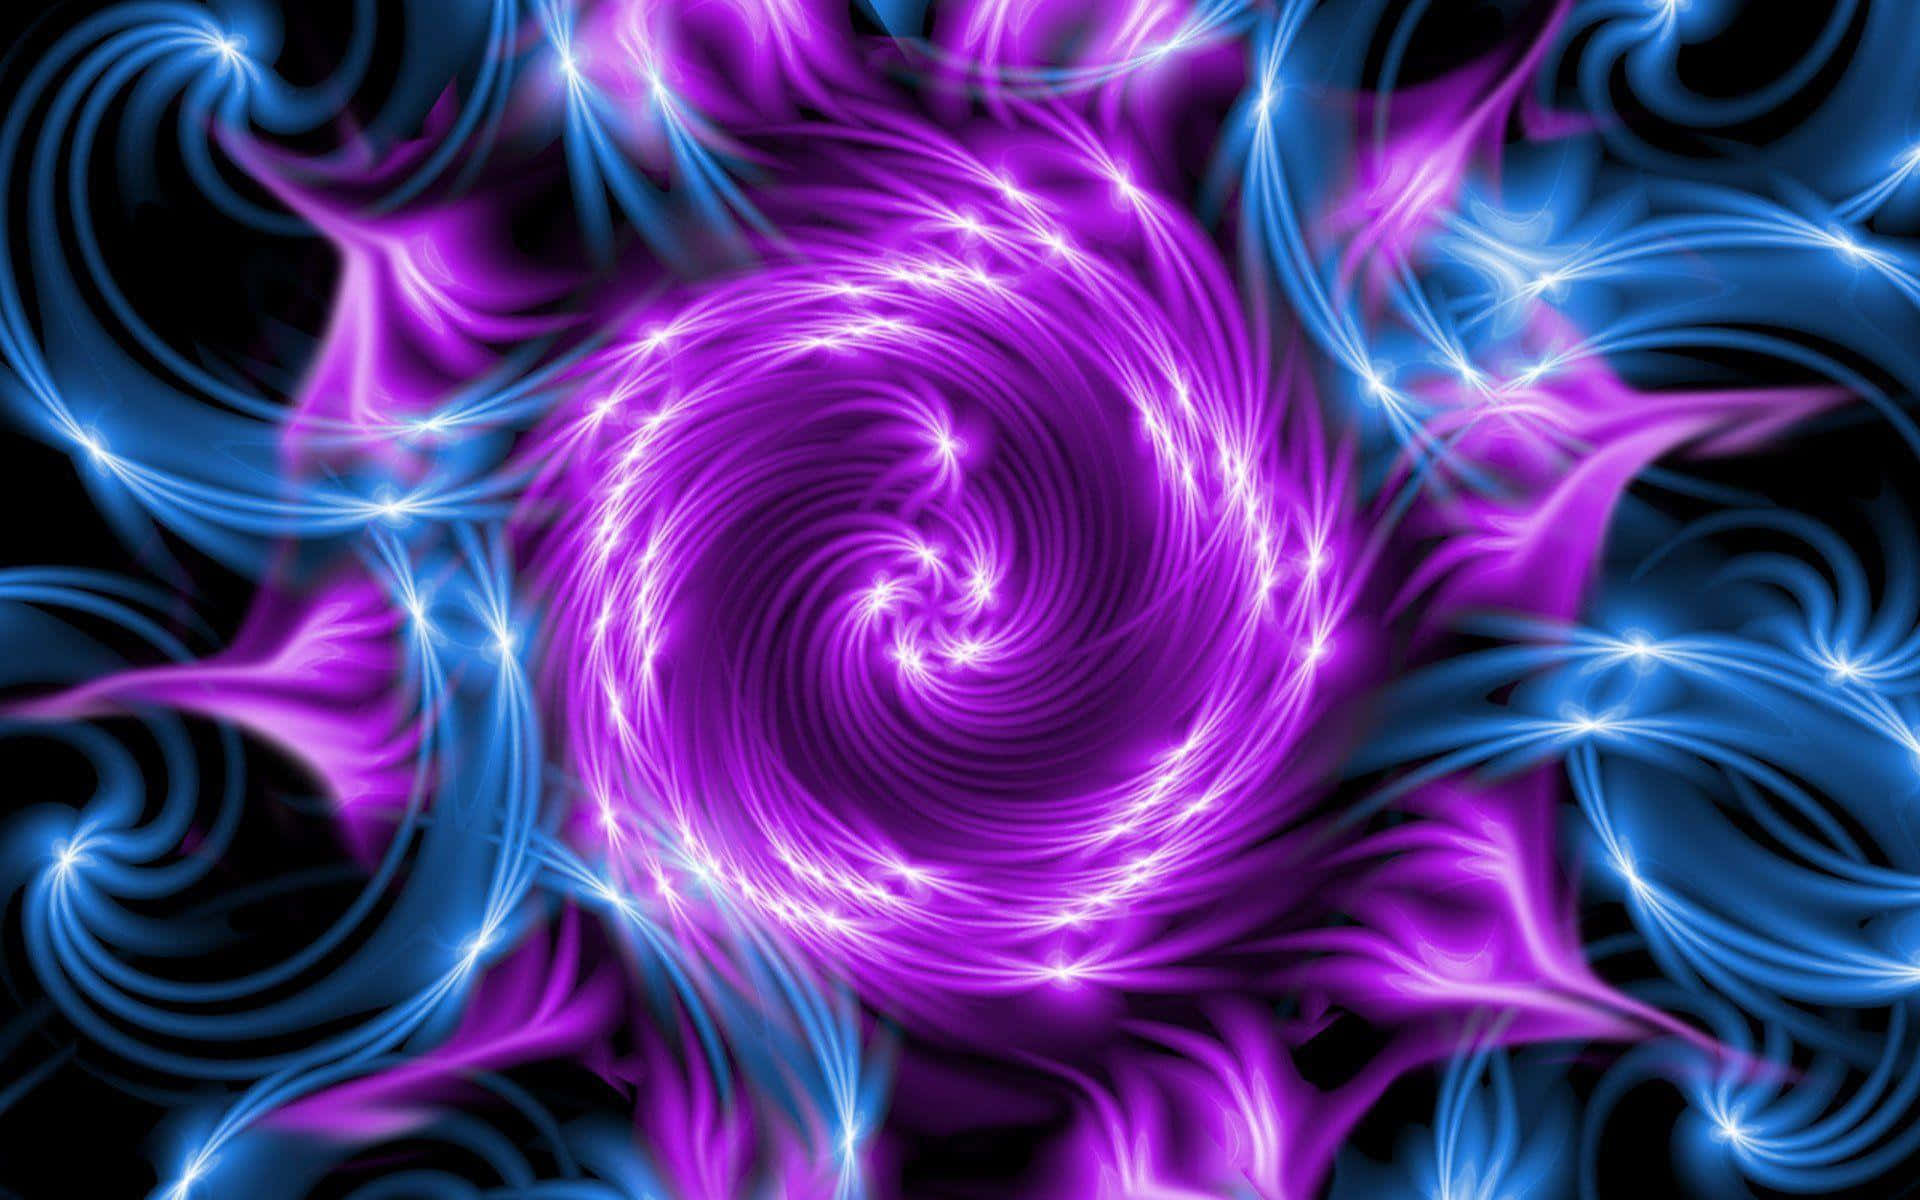 Purple And Blue Swirling Spiral